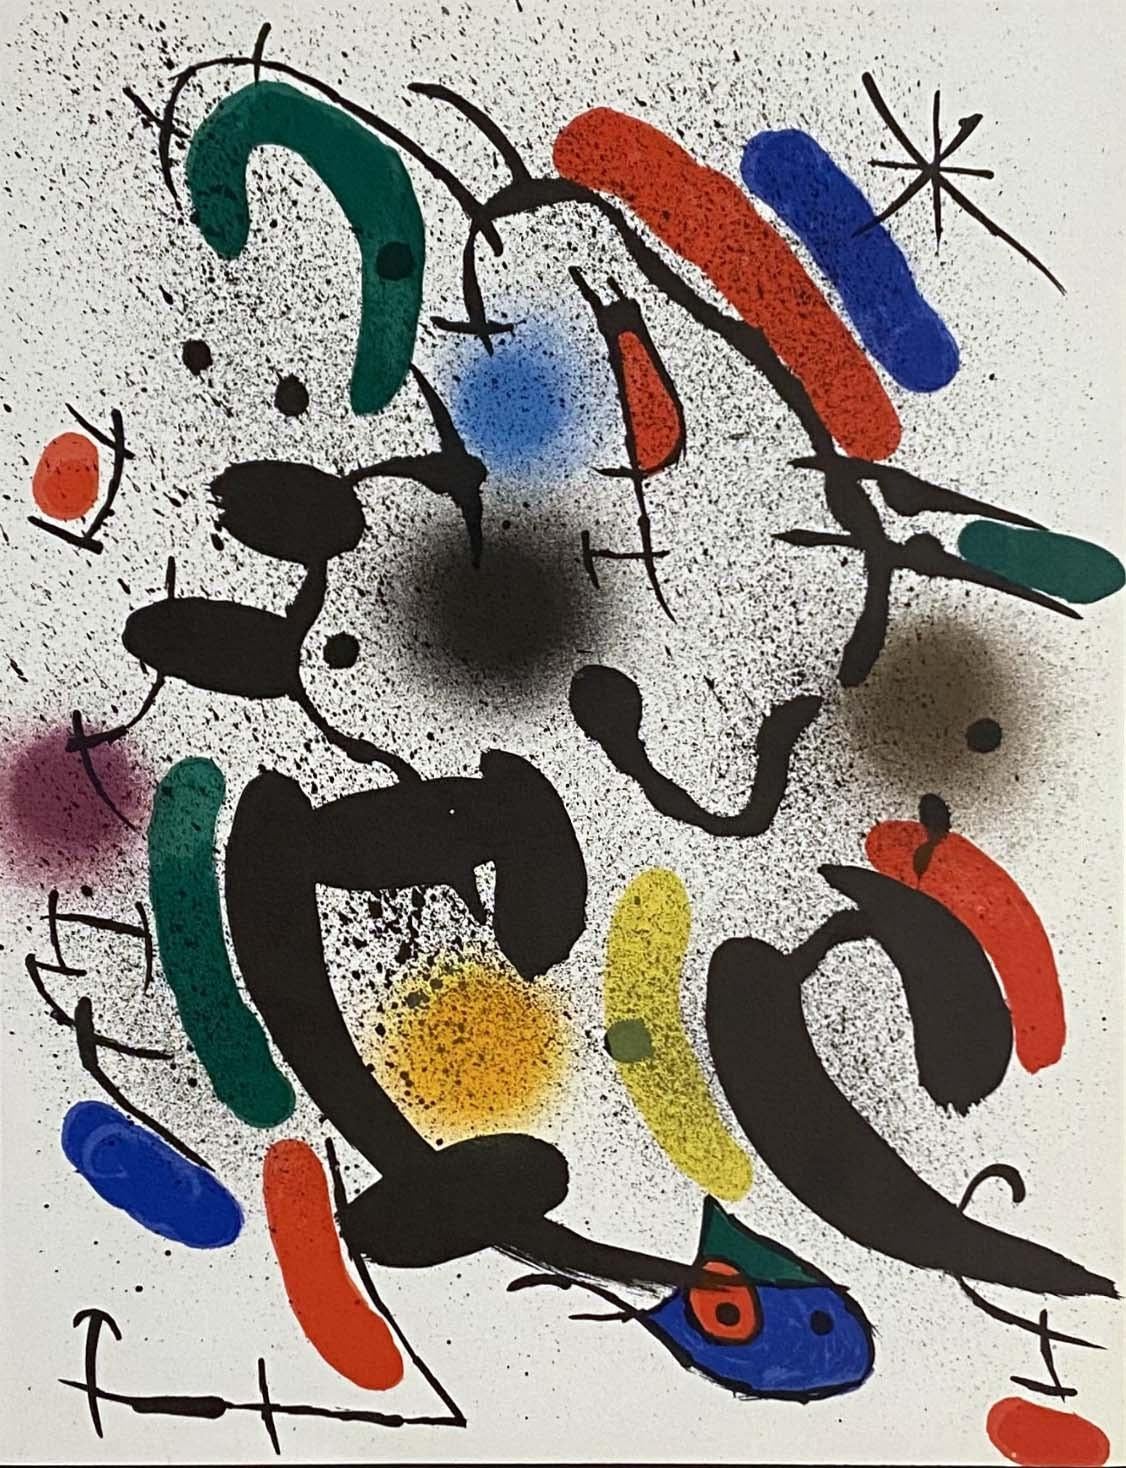 Joan Miró Abstract Print - Plate VI, from 1972 Lithographe I